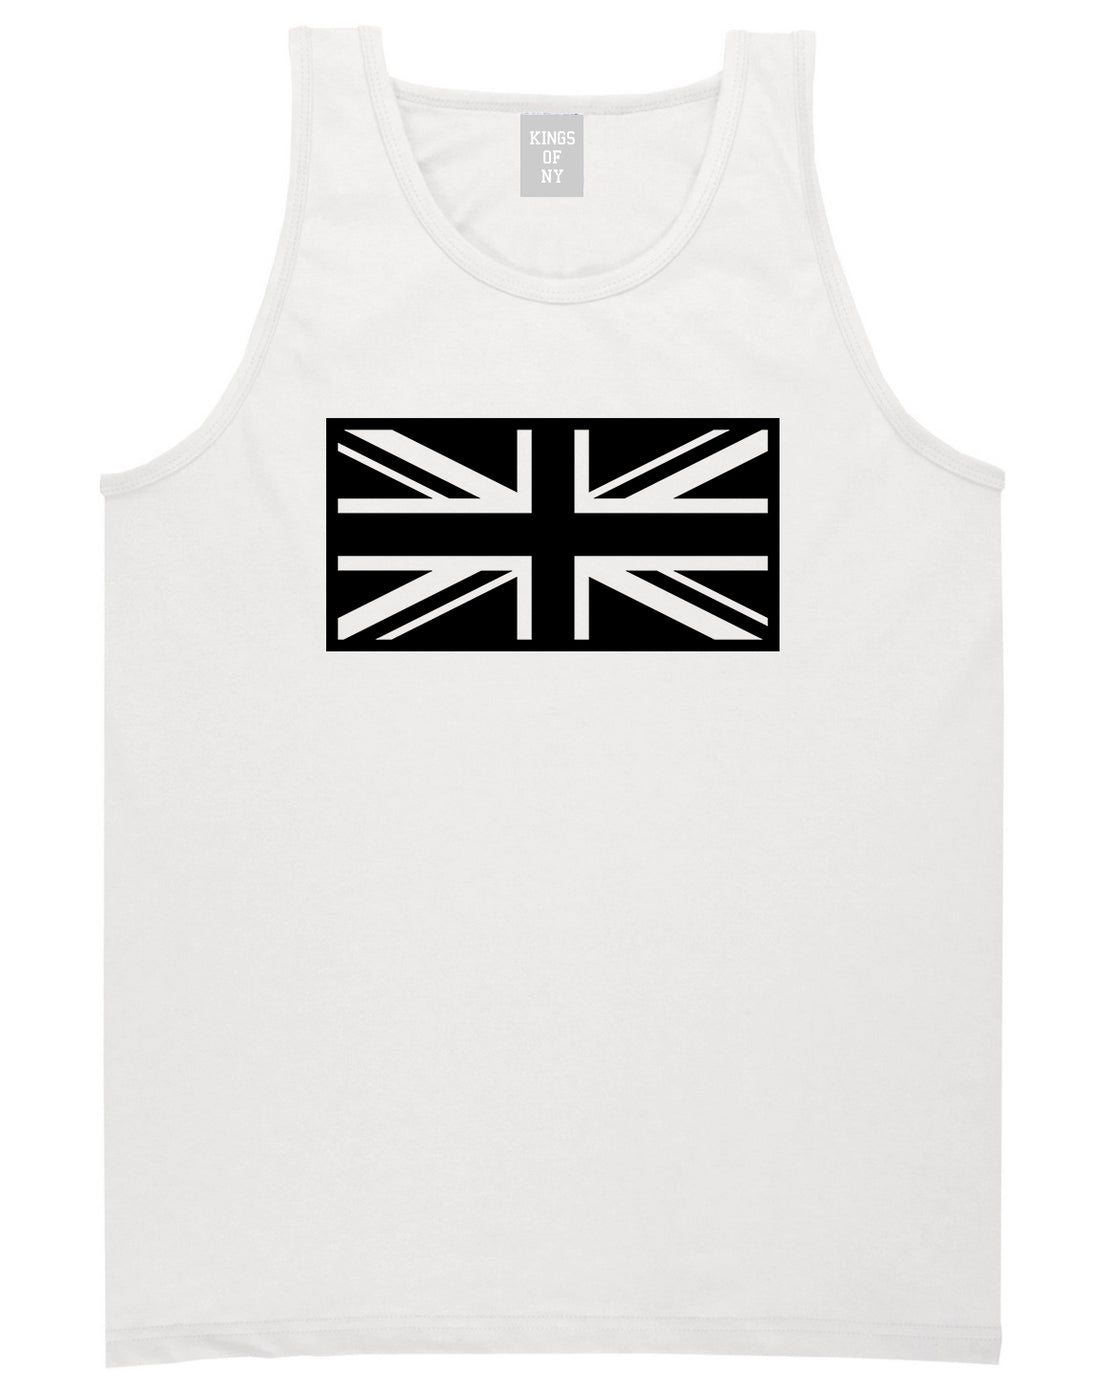 British Army Style White Tank Top Shirt by Kings Of NY